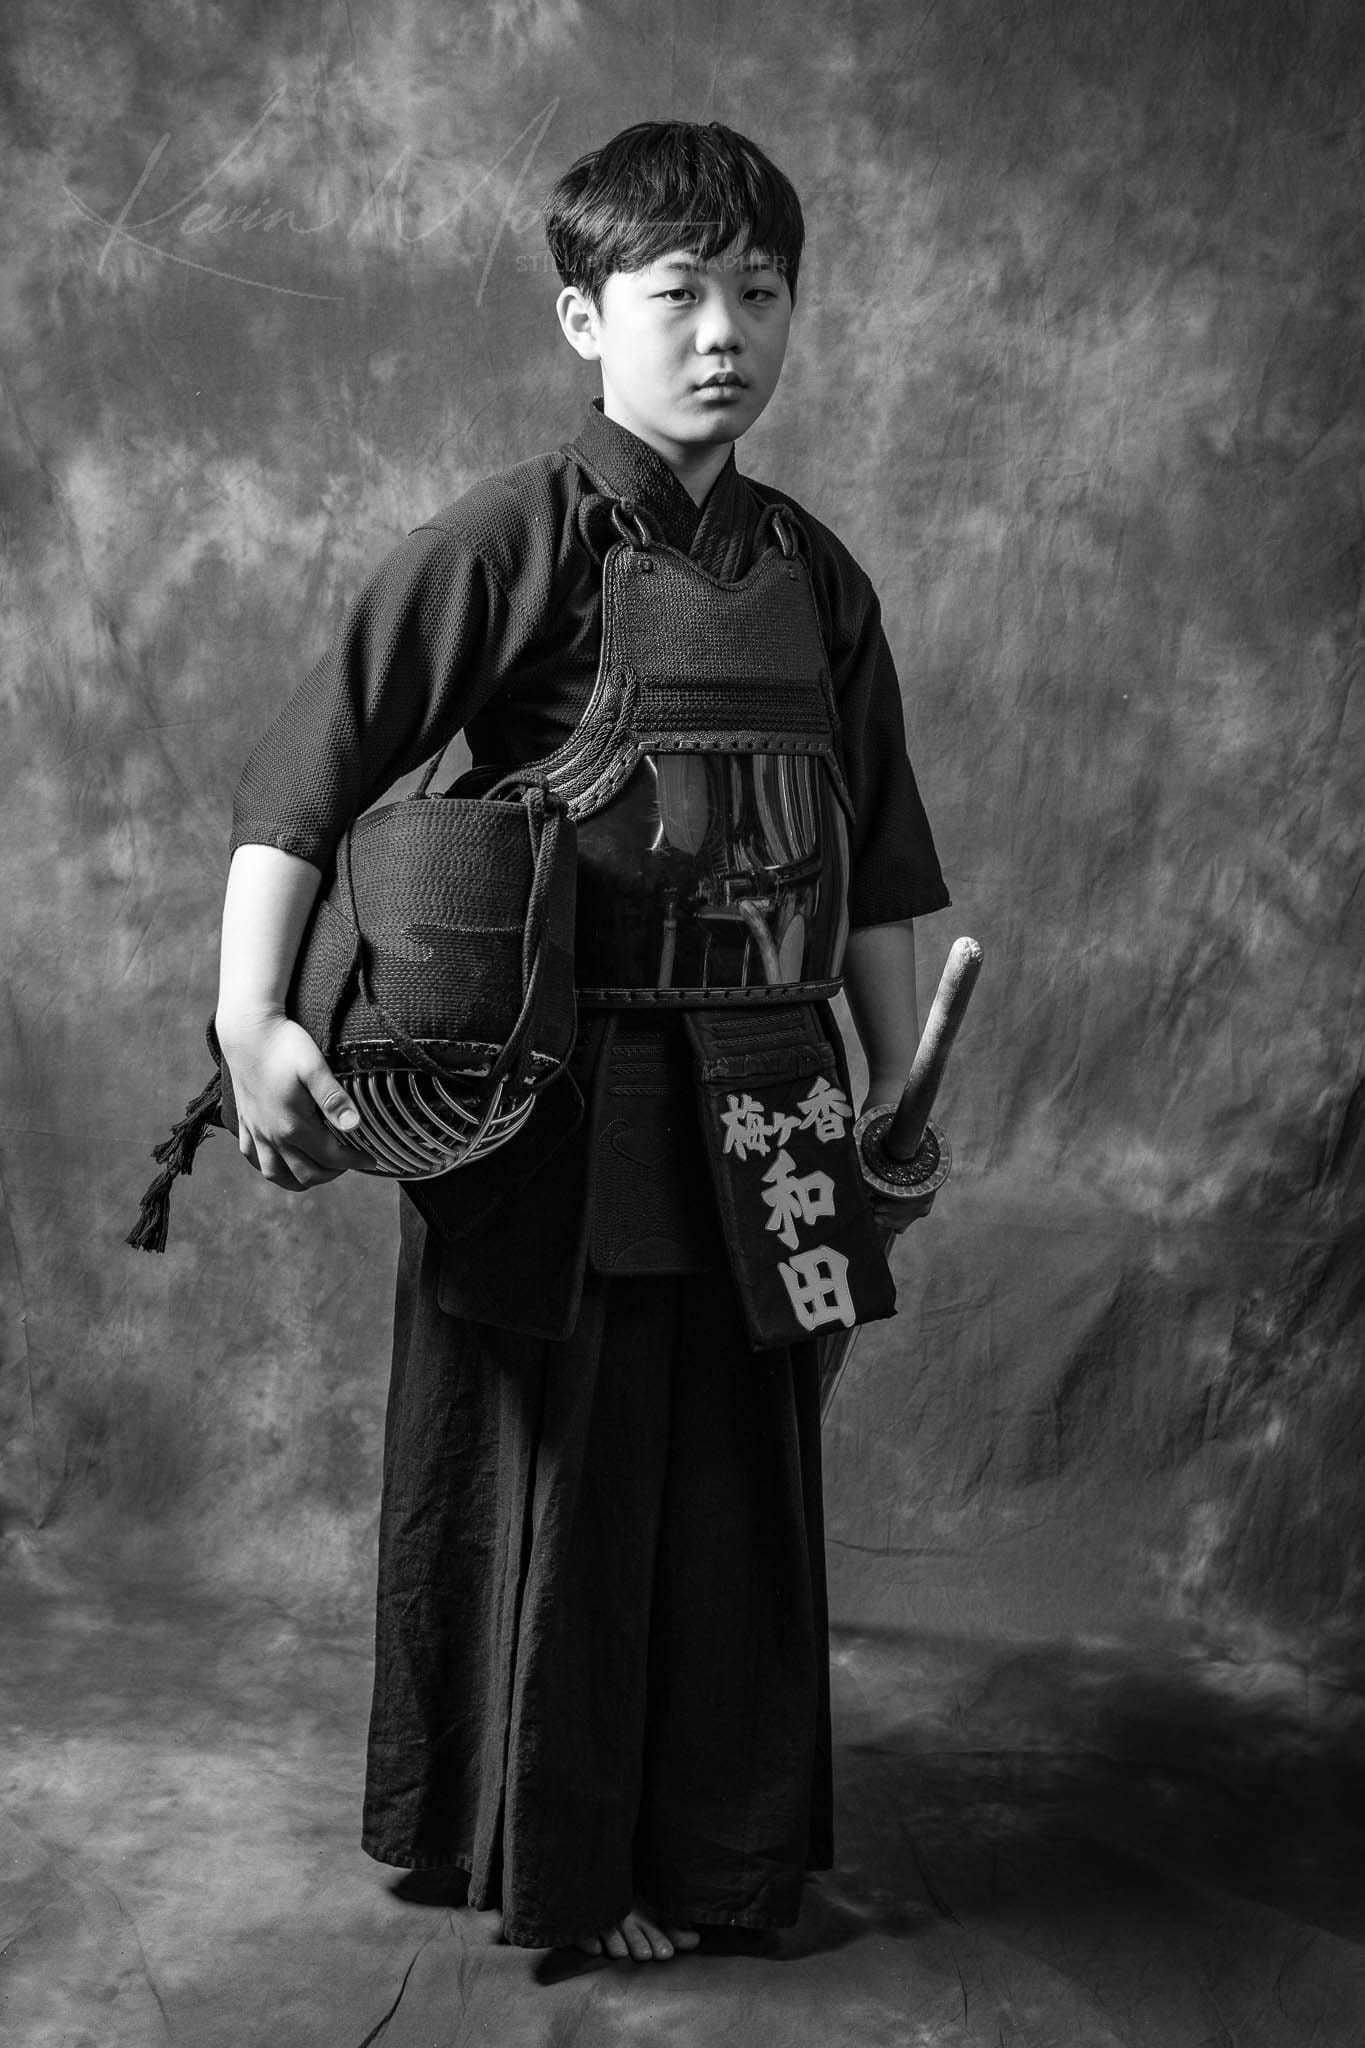 Monochrome portrait of a martial artist in traditional Japanese attire holding a sword.